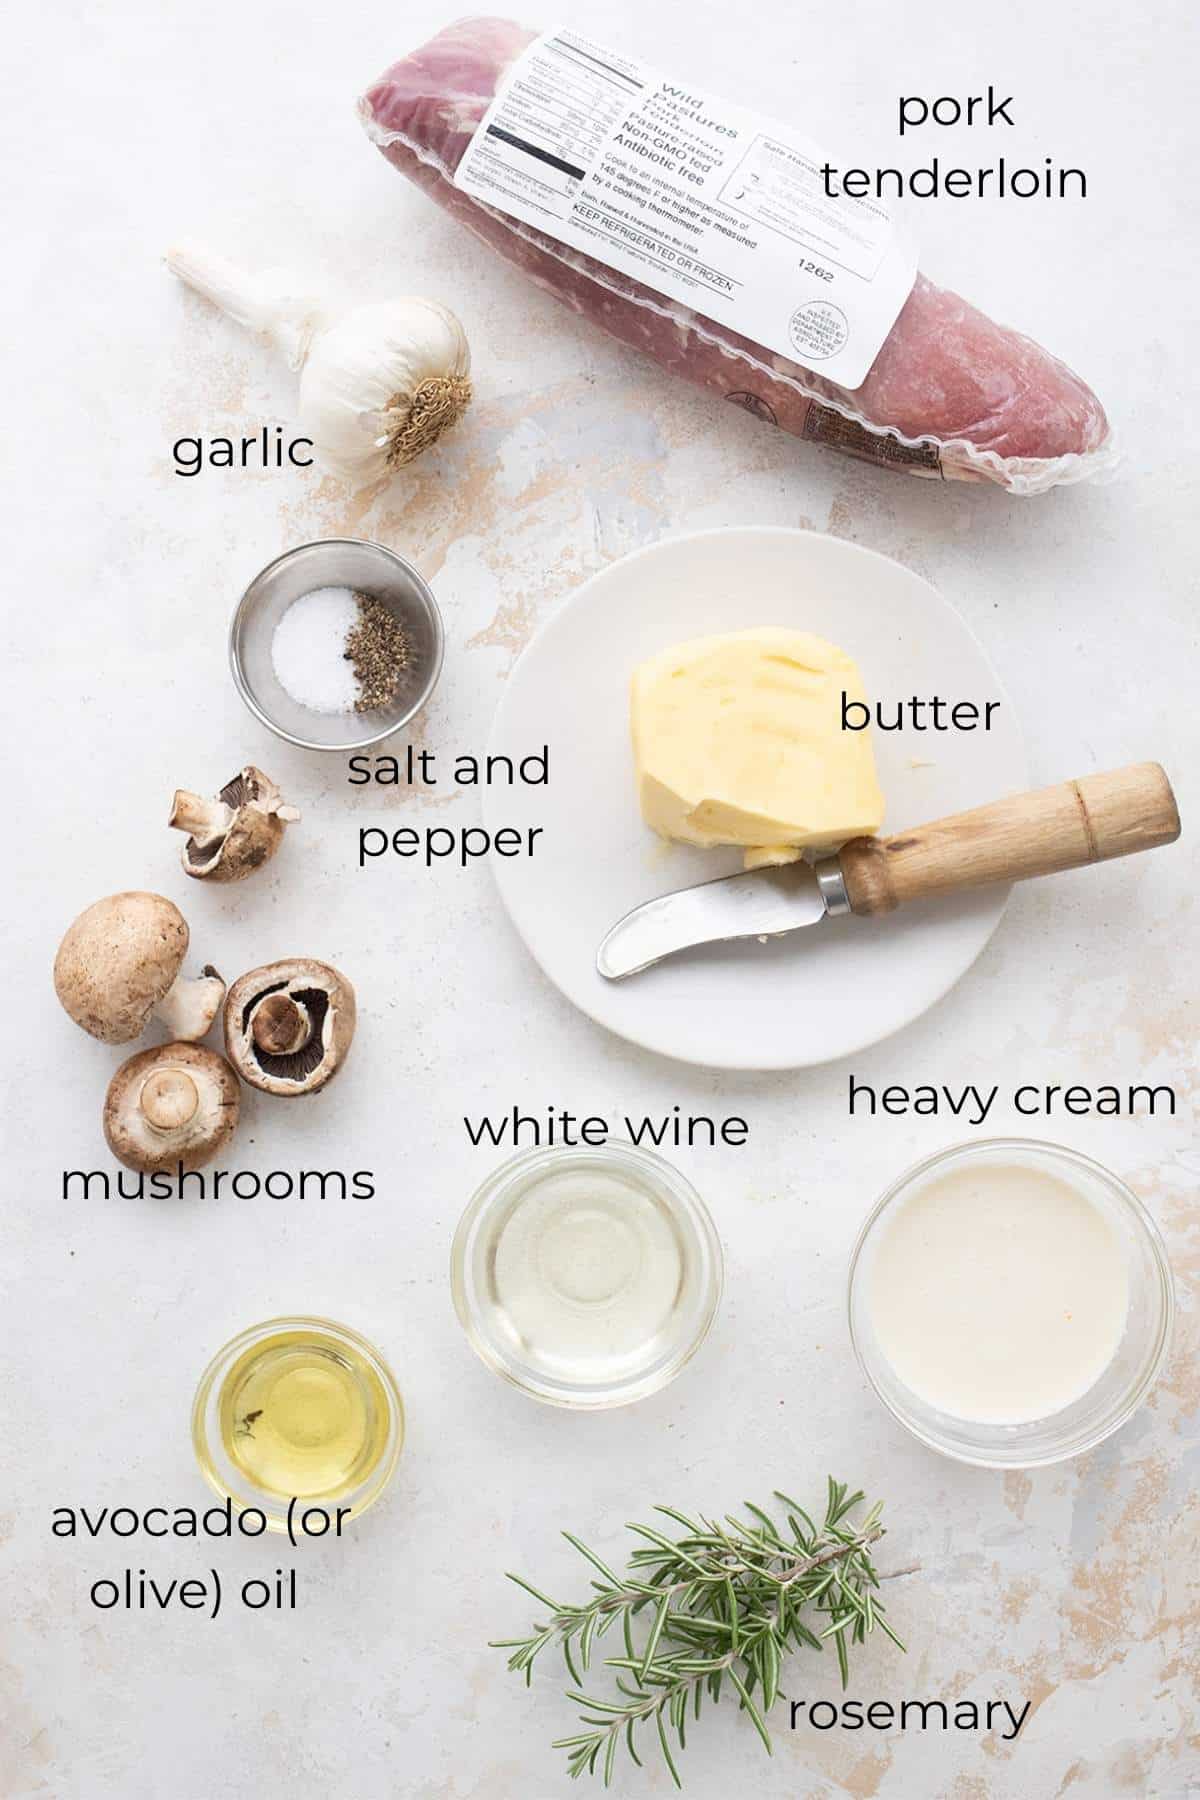 Top down image of ingredients needed for pork medallions. 